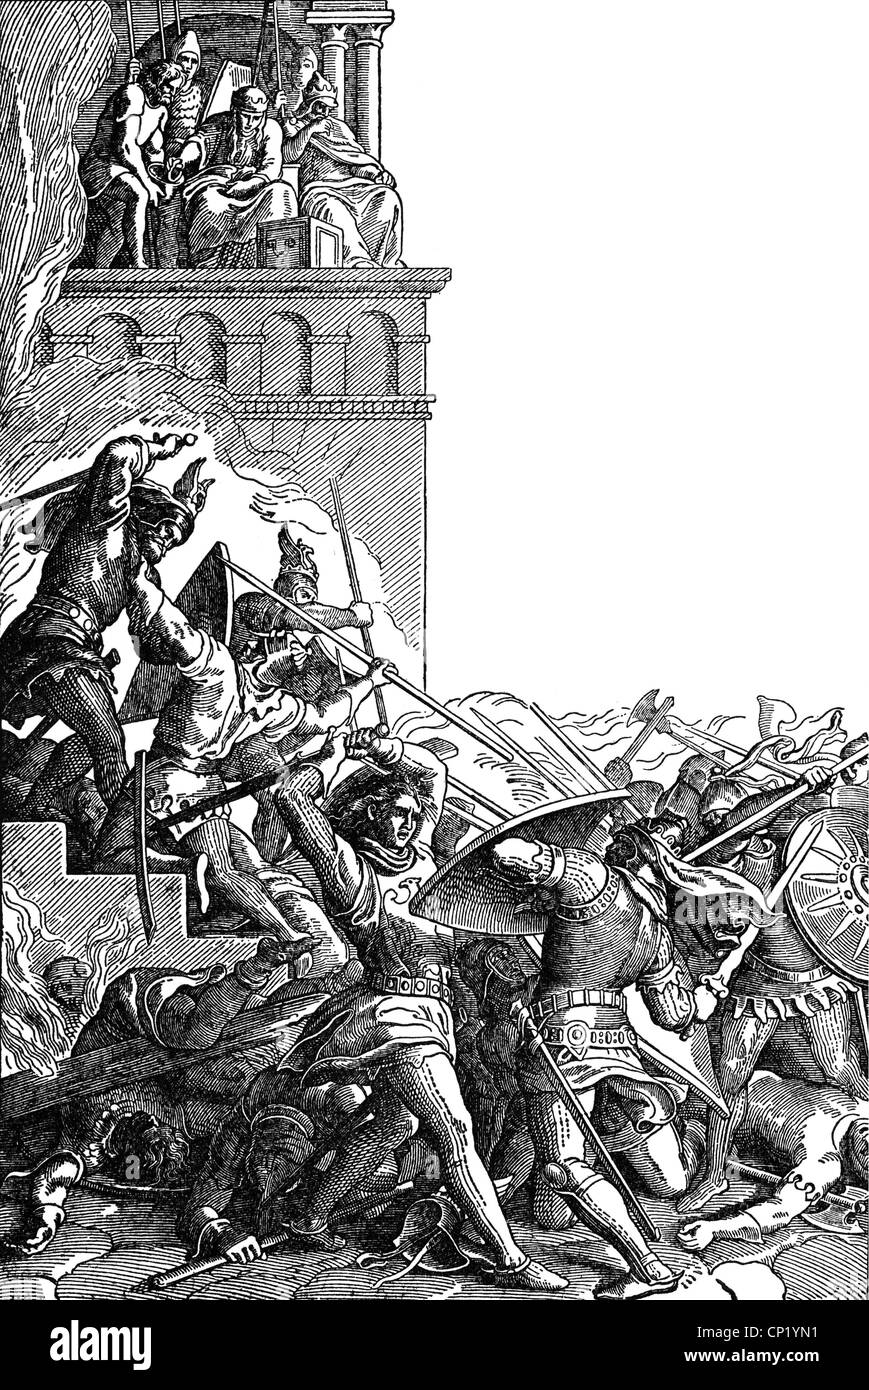 literature, mythologie, Nibelung legend, battle between Burgundians and Huns at the court of King Attila, wood engraving, 19th century, 'Deutsche Heldensagen' by Albert Richter and Guido Goerres, Leipzig, 1932, Additional-Rights-Clearences-Not Available Stock Photo